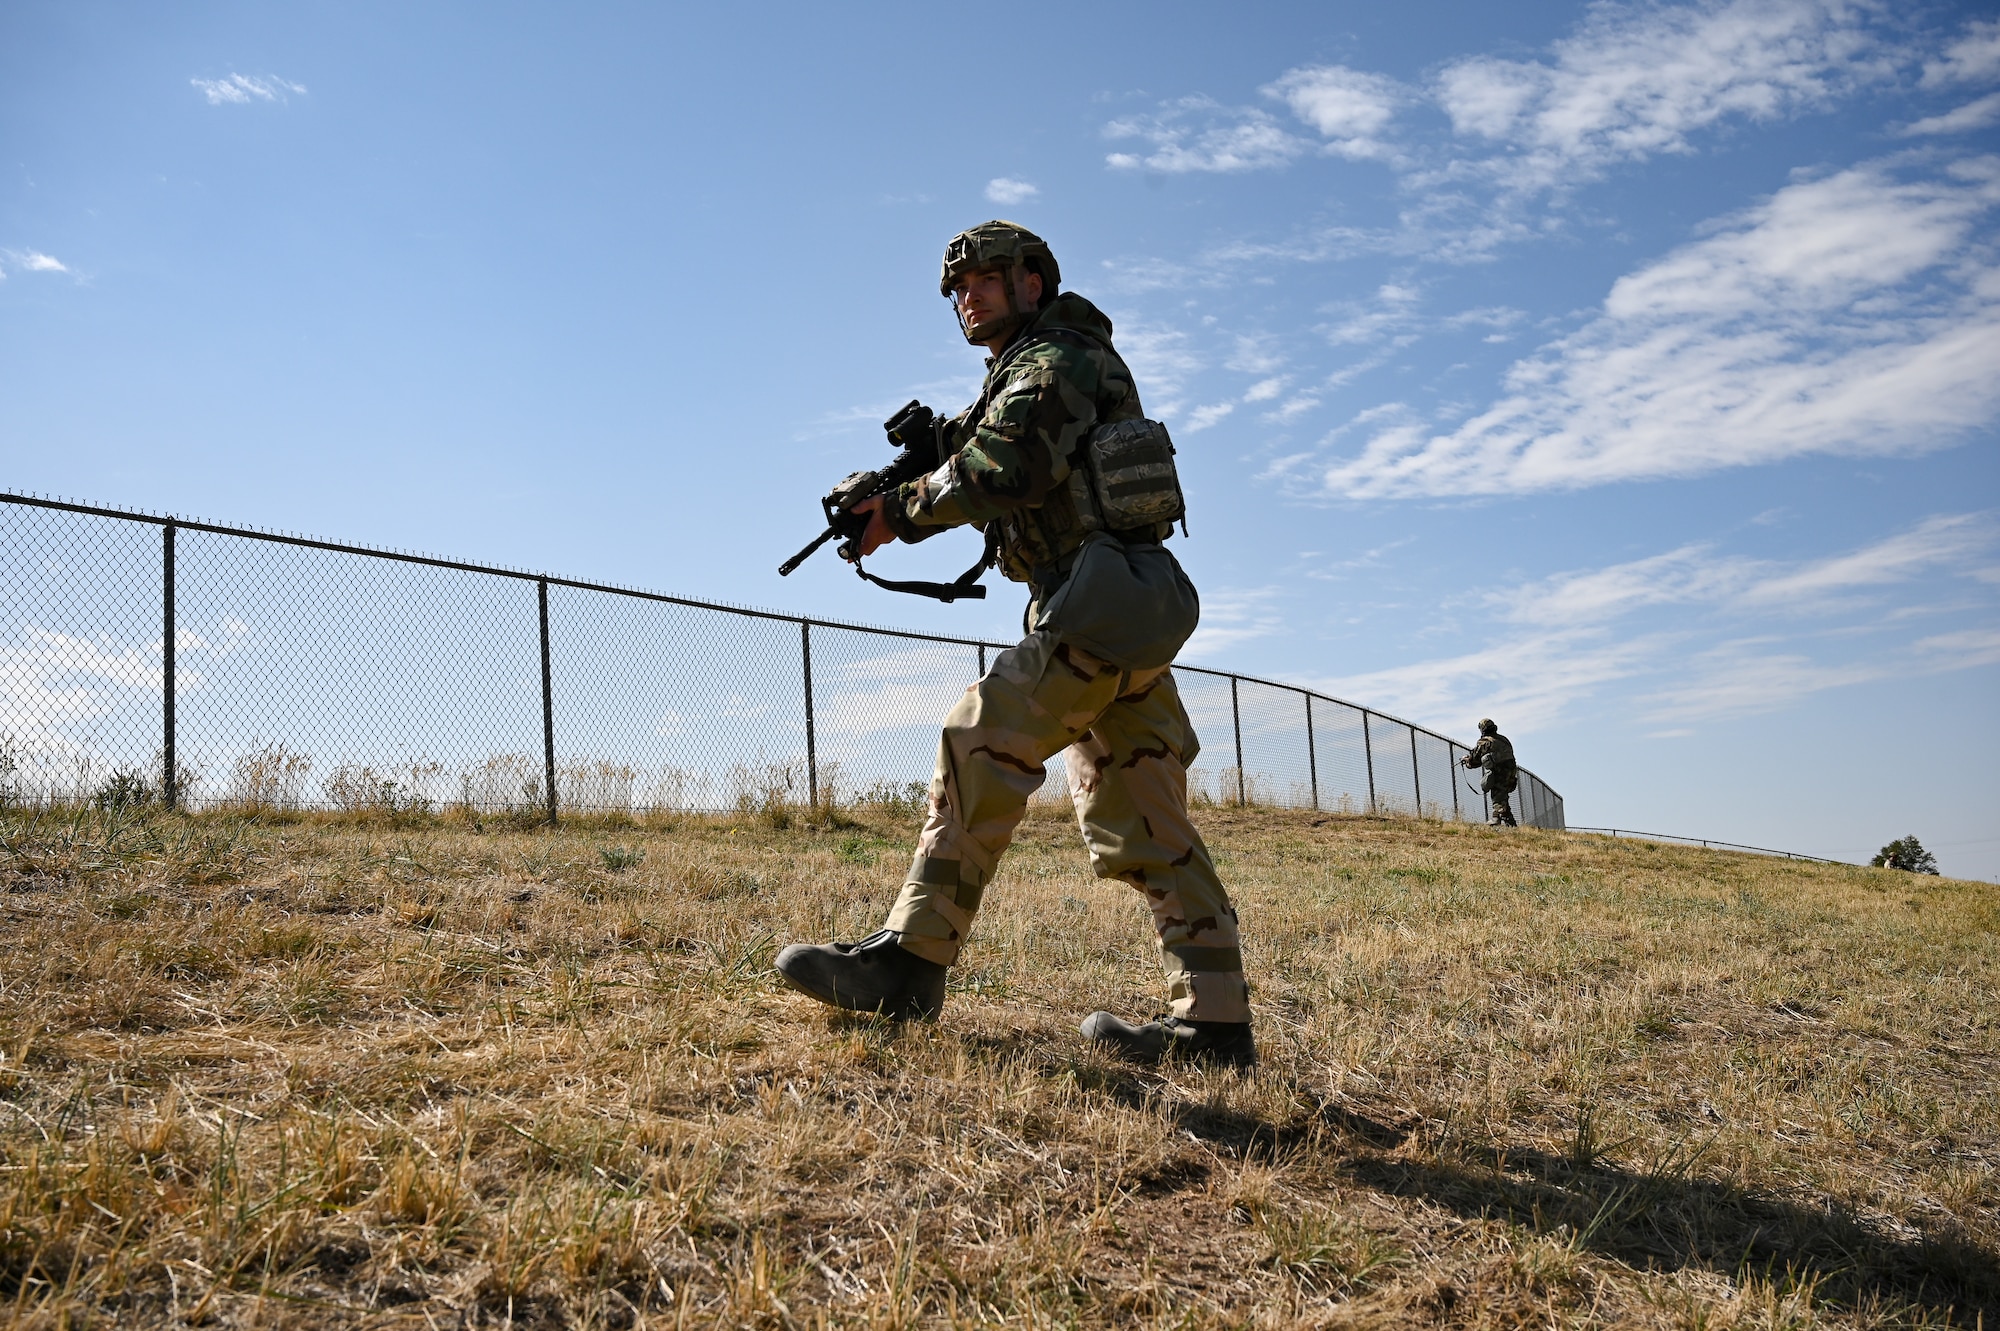 Staff Sgt. Isaac Preuss, 75th Security Forces Squadron, advances up a hill during a readiness exercise at Hill Air Force Base, Utah, Sept. 23, 2021. Squadrons from the 75th Air Base Wing participated in a phase II readiness exercise where they were assessed while performing tasks in an austere environment. (U.S. Air Force photo by R. Nial Bradshaw)